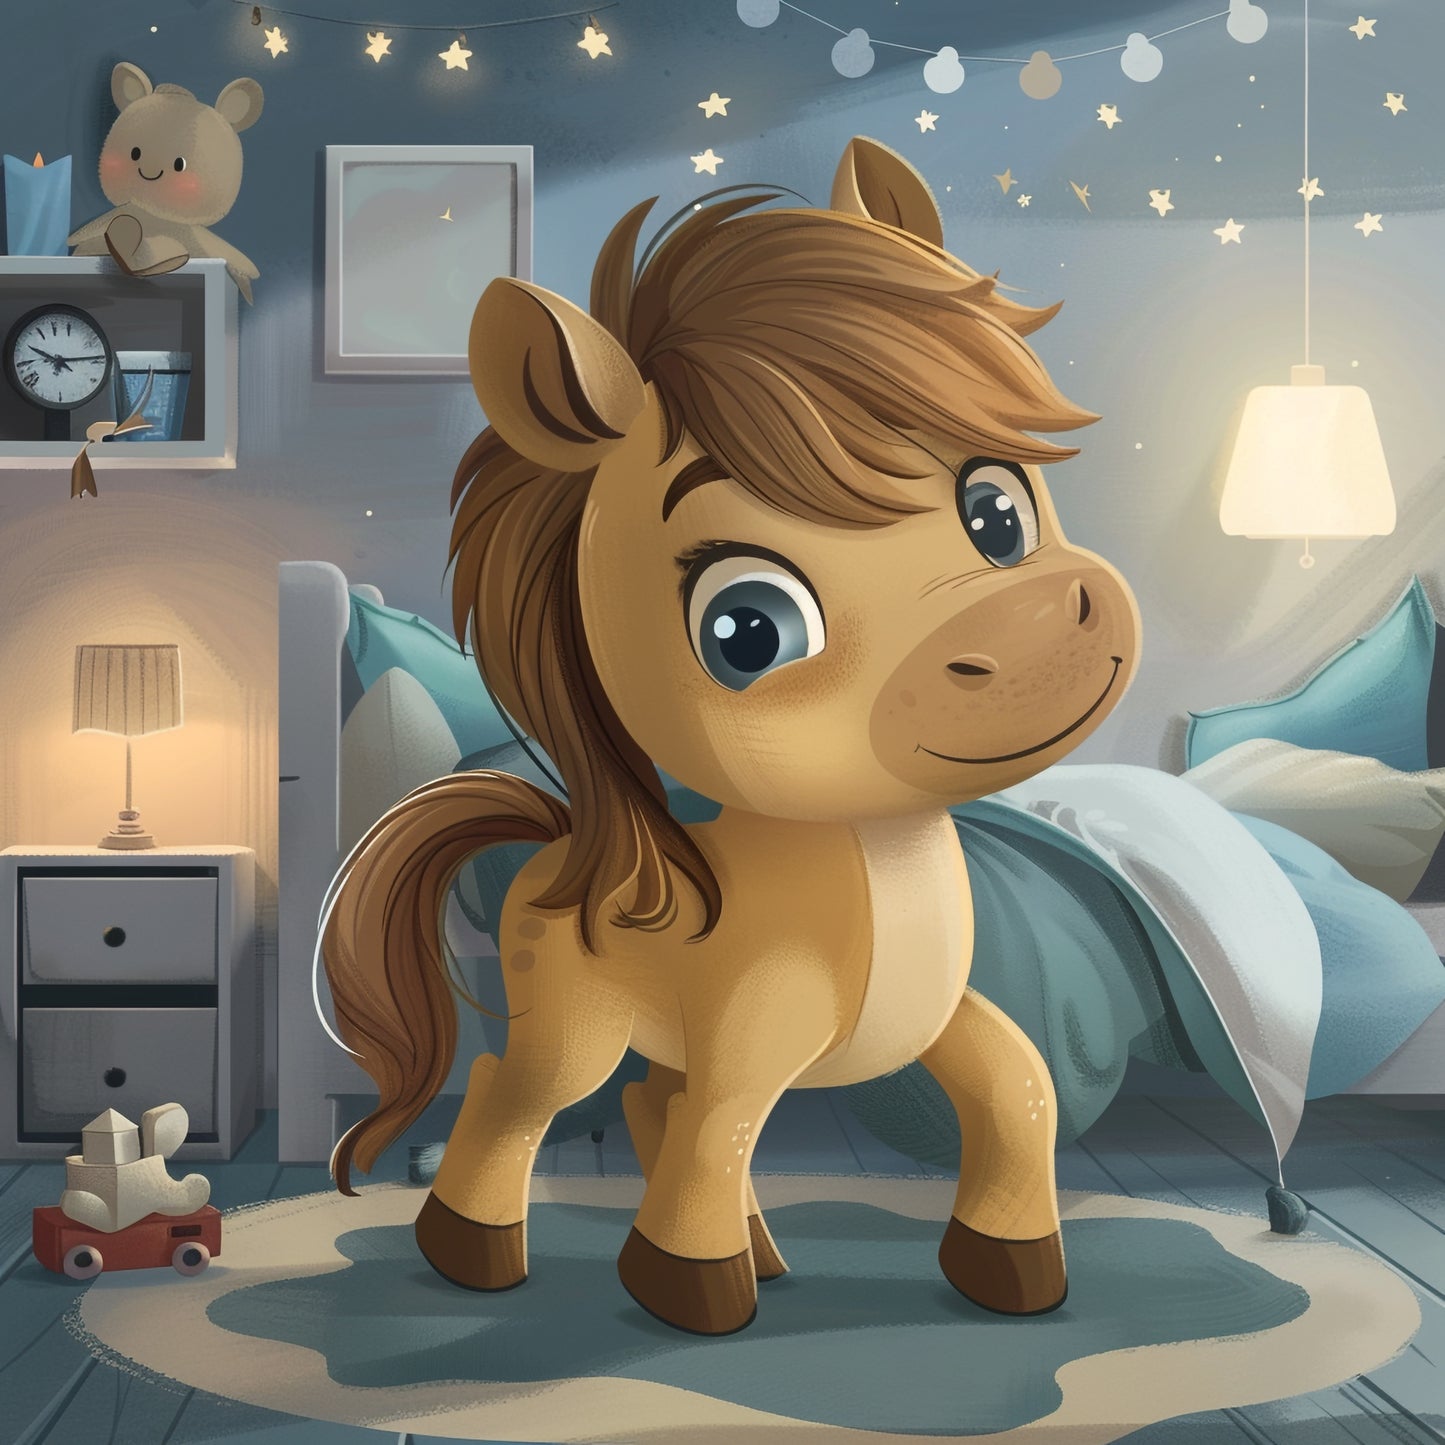 Adorable Illustrated Baby Horse in a Cozy Bedroom Setting